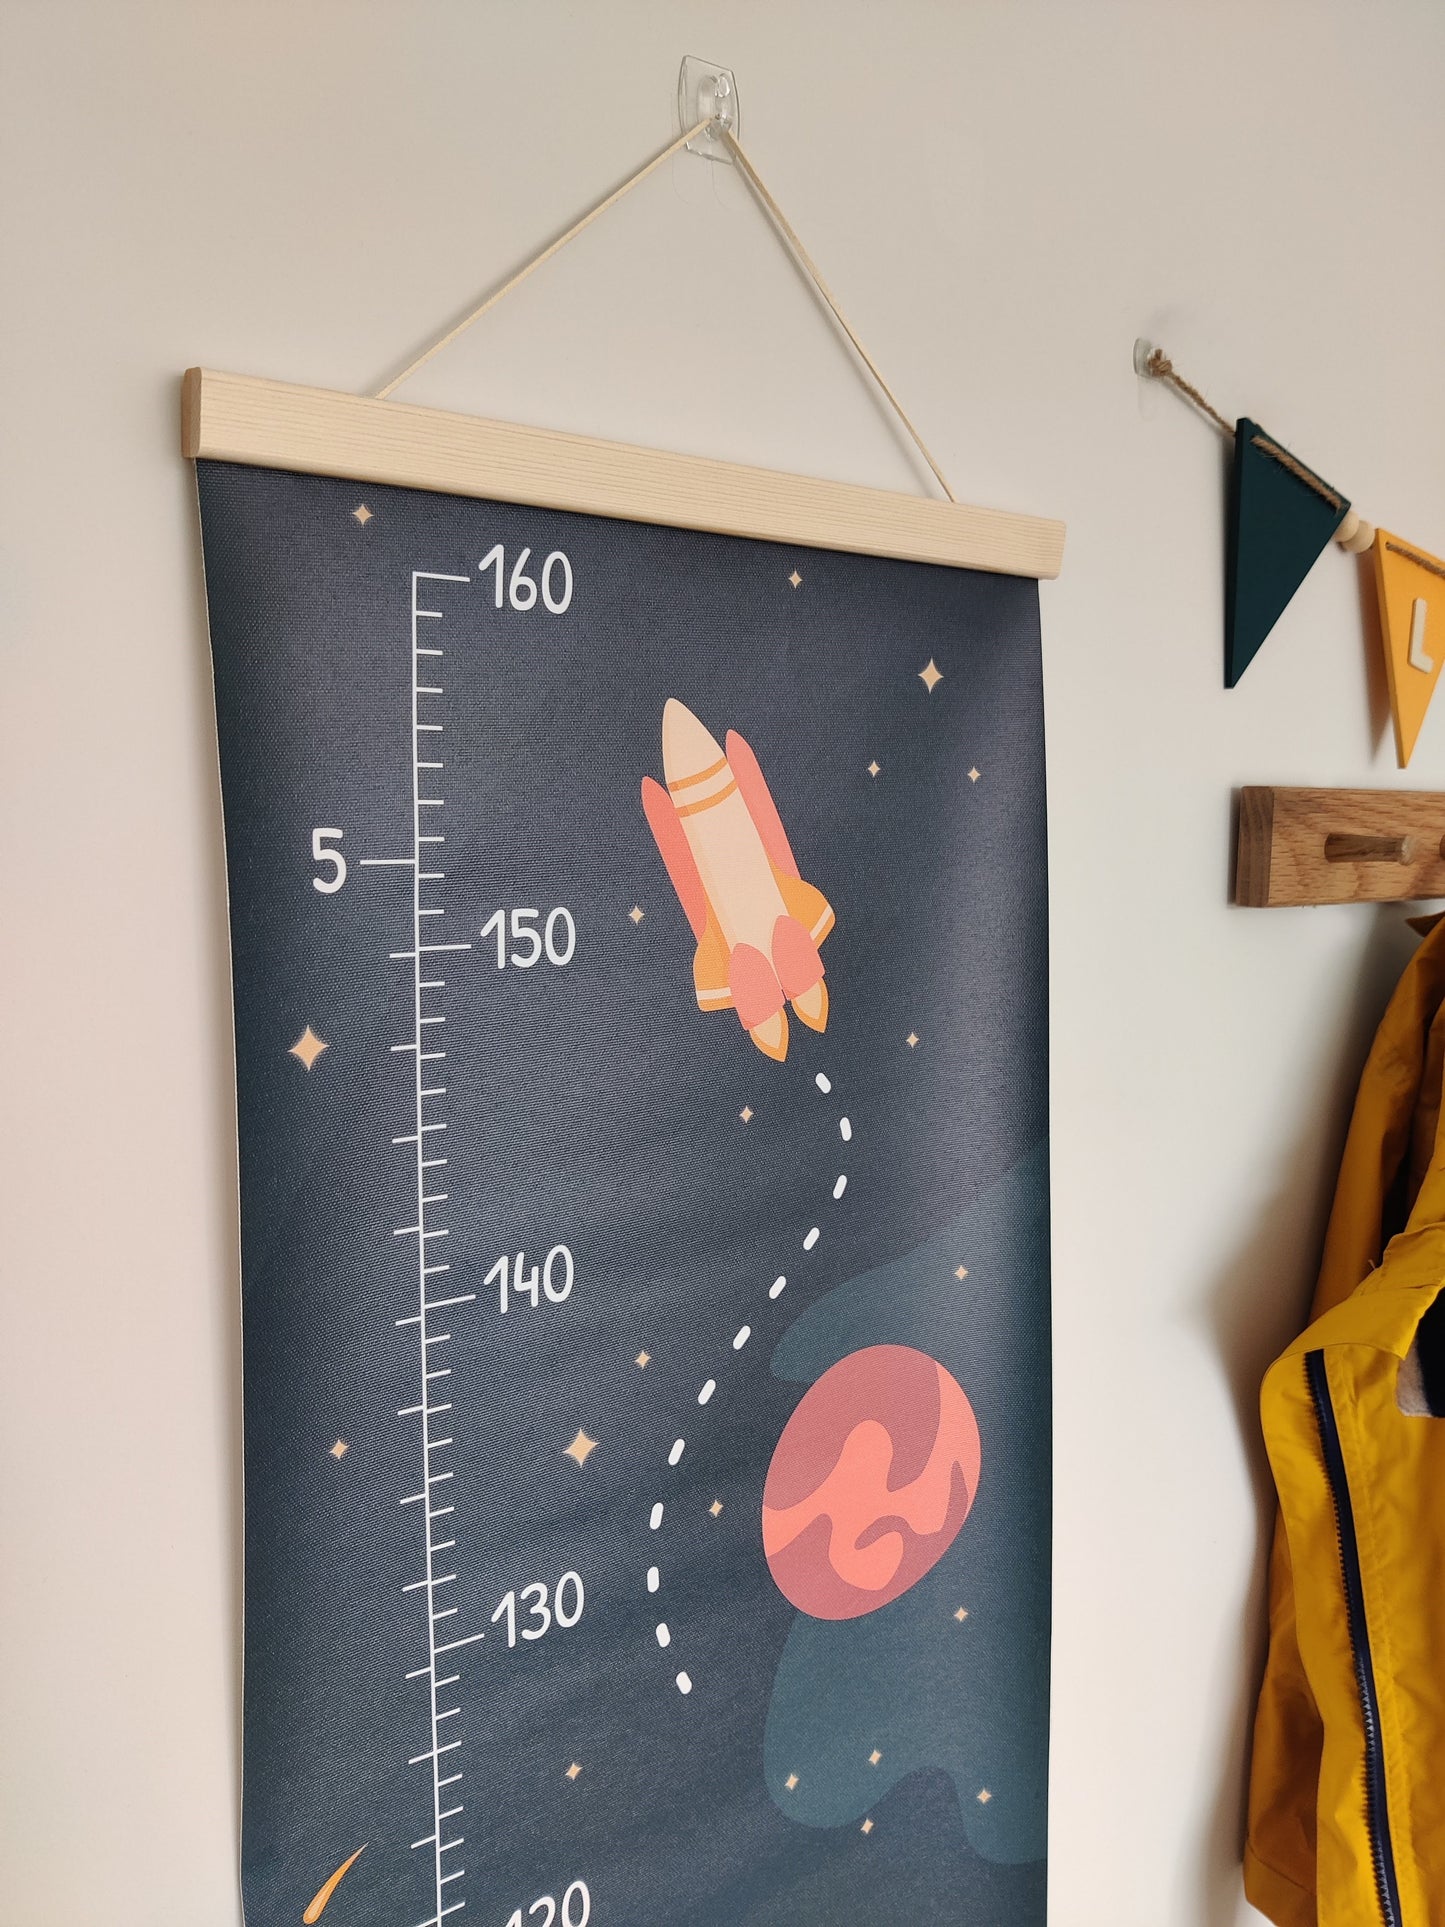 Close up of a canvas height chart with a planet, rocket and stars on the top. The canvas is framed with a wooden hanger.